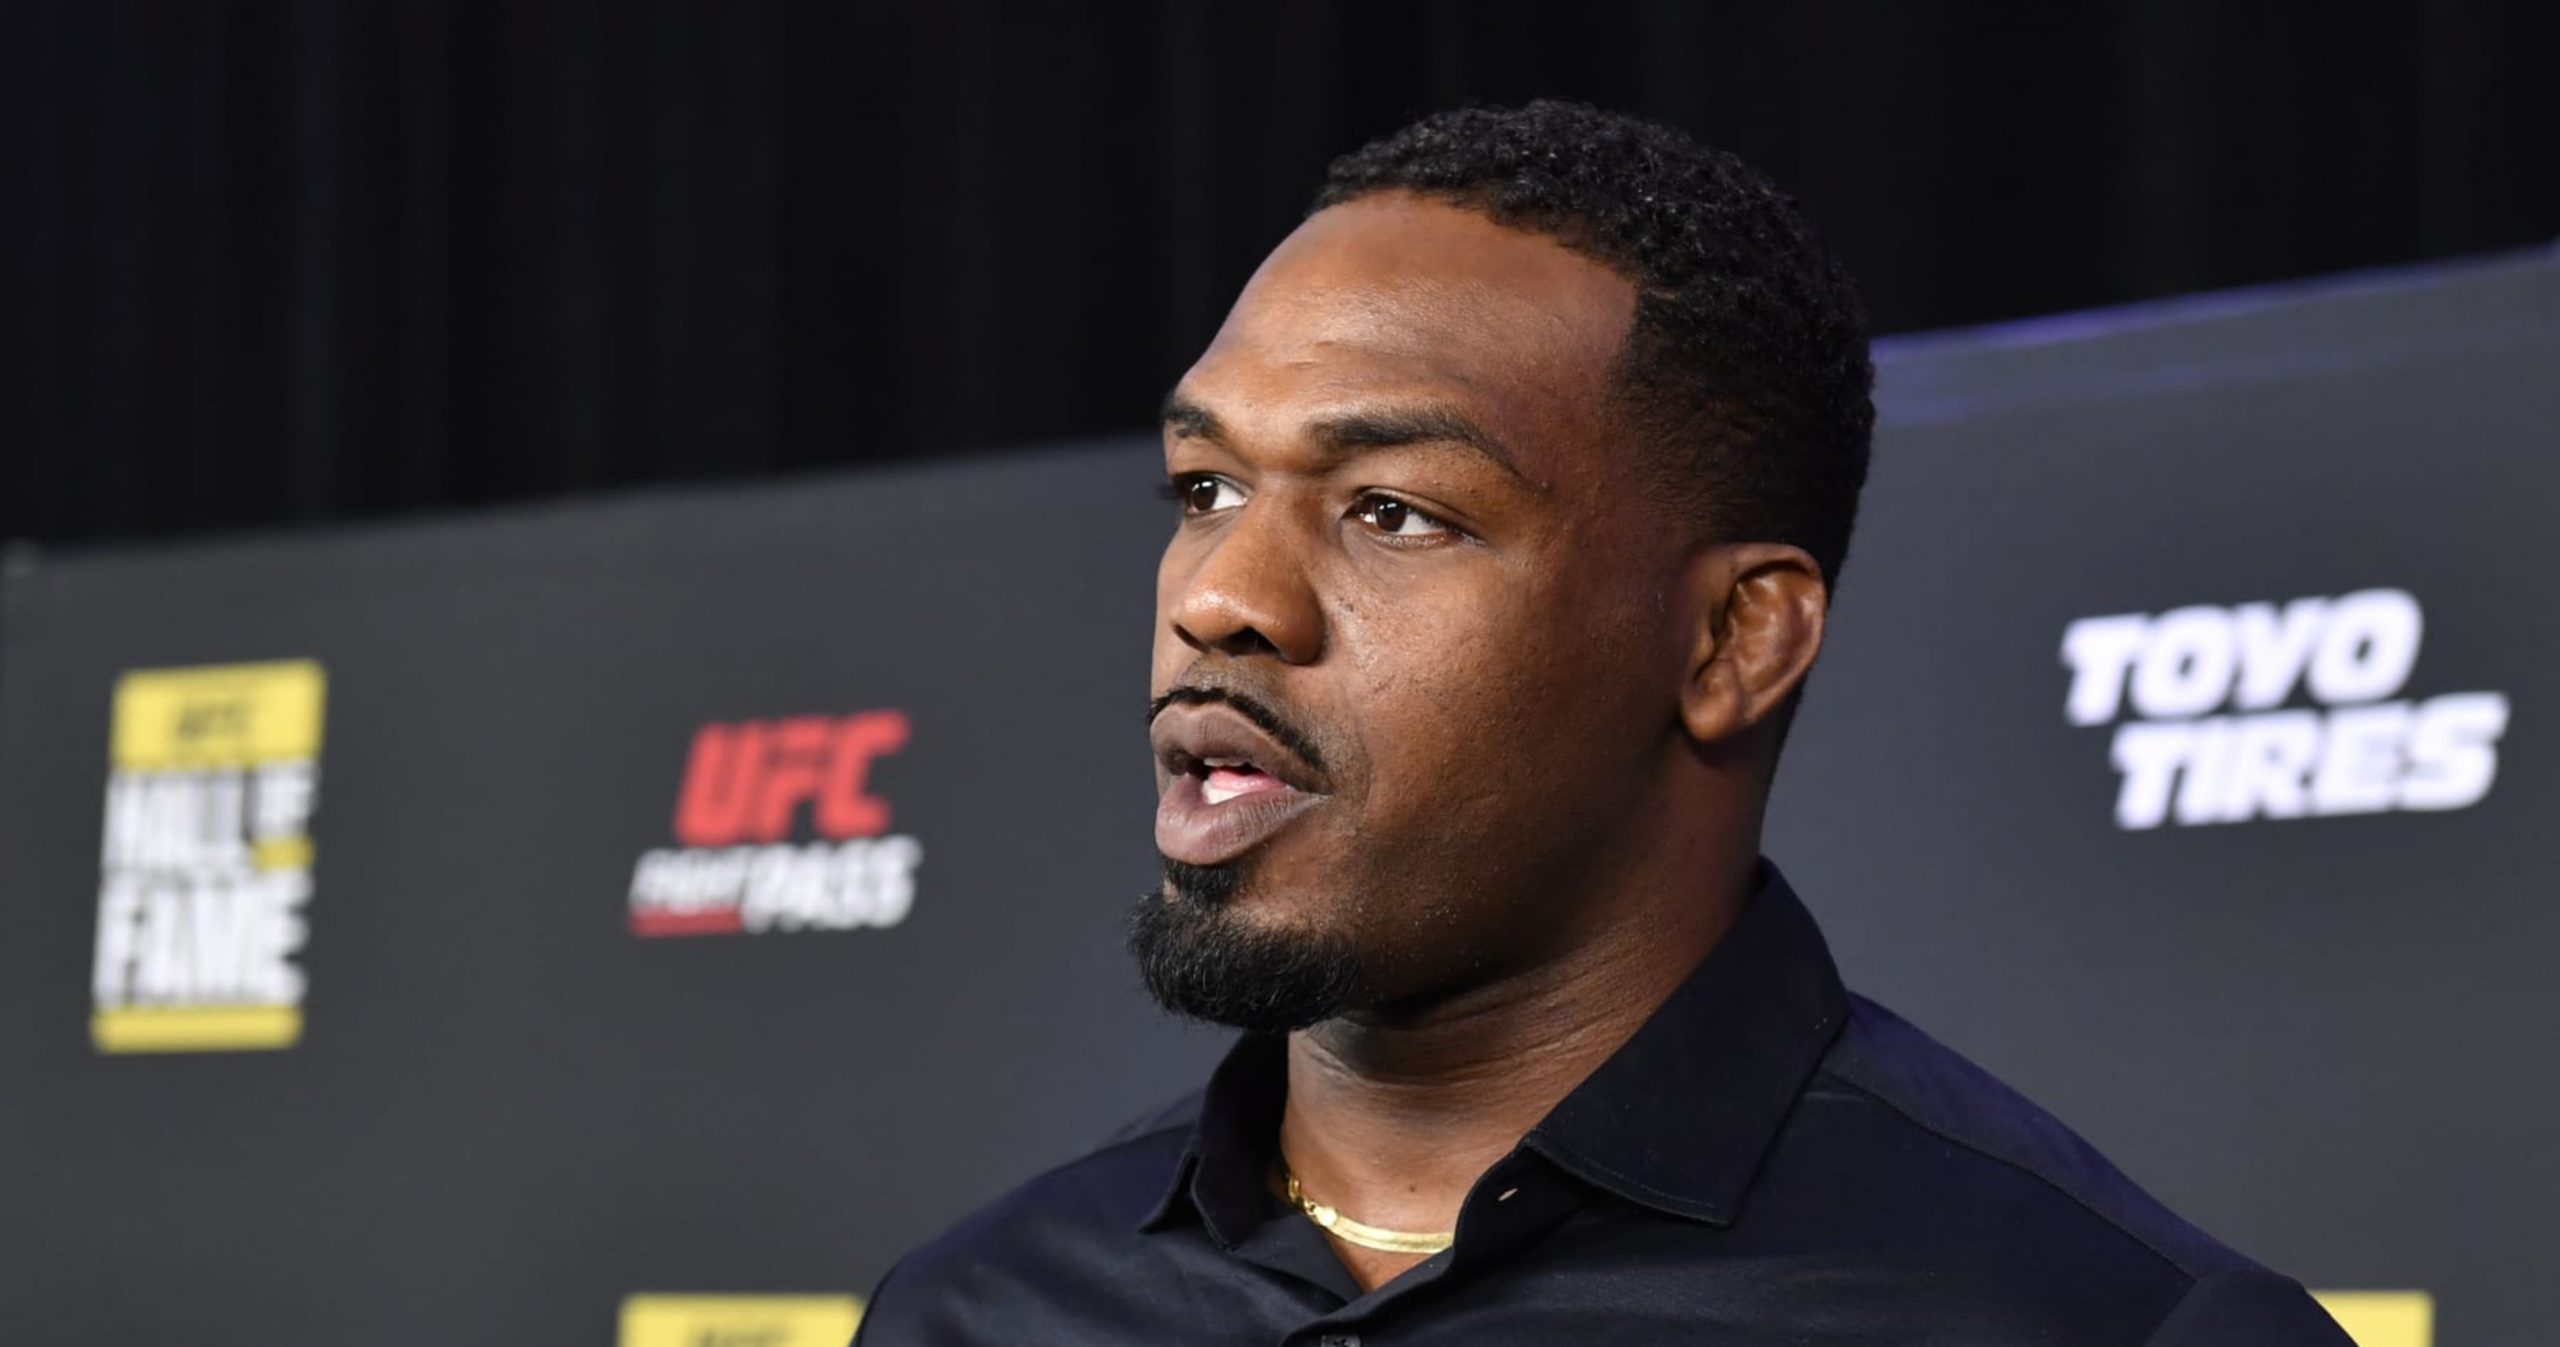 SOURCE SPORTS: Jon Jones Signs New 8-Fight Deal With UFC, March Return Set